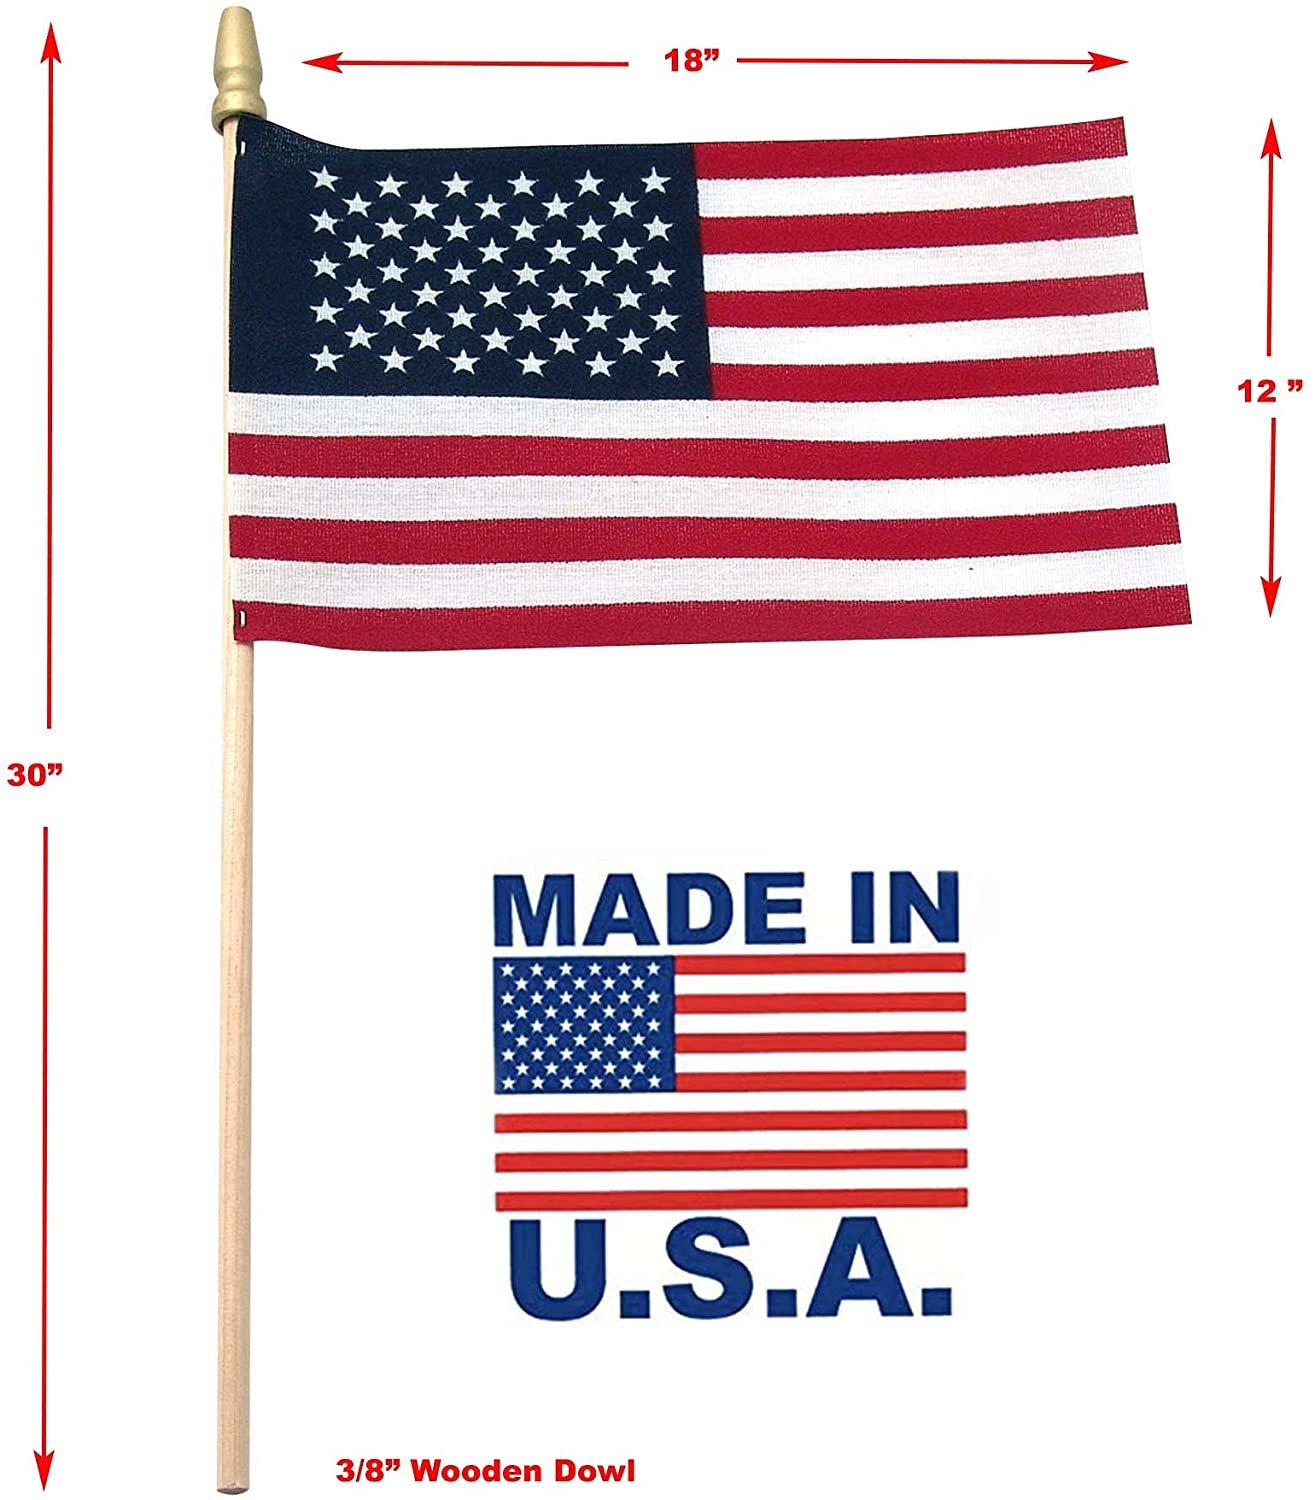 Handheld Spearhead American Flags 12 x 18 inch. Handheld Stick Flags with  SpearTop Great for Patriotic Decorations or Celebrations. Made in the USA  Qty-12